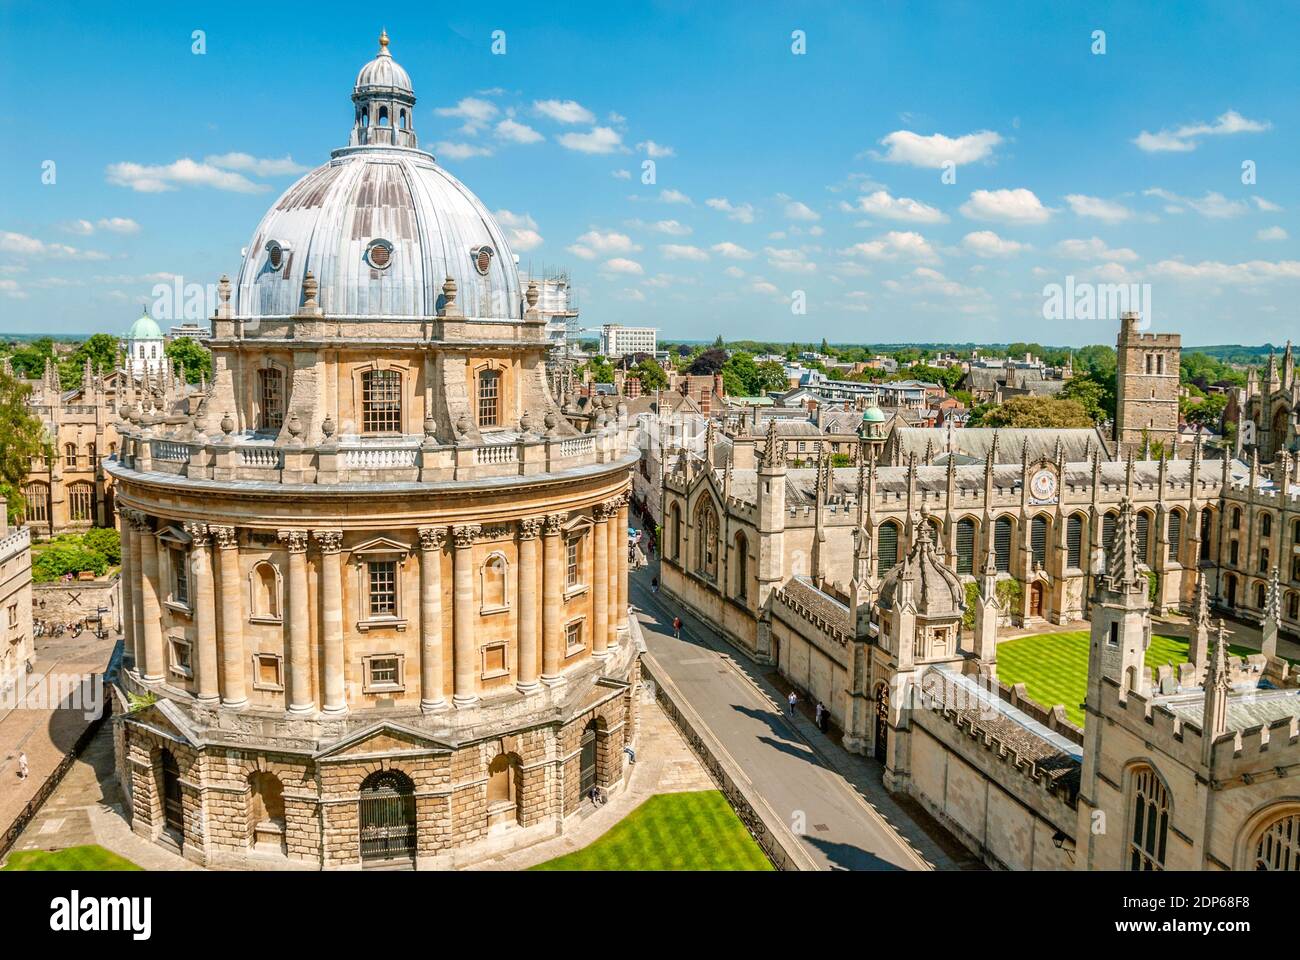 Radcliffe Camera and All Souls College building in Oxford, Oxfordshire, England Stock Photo